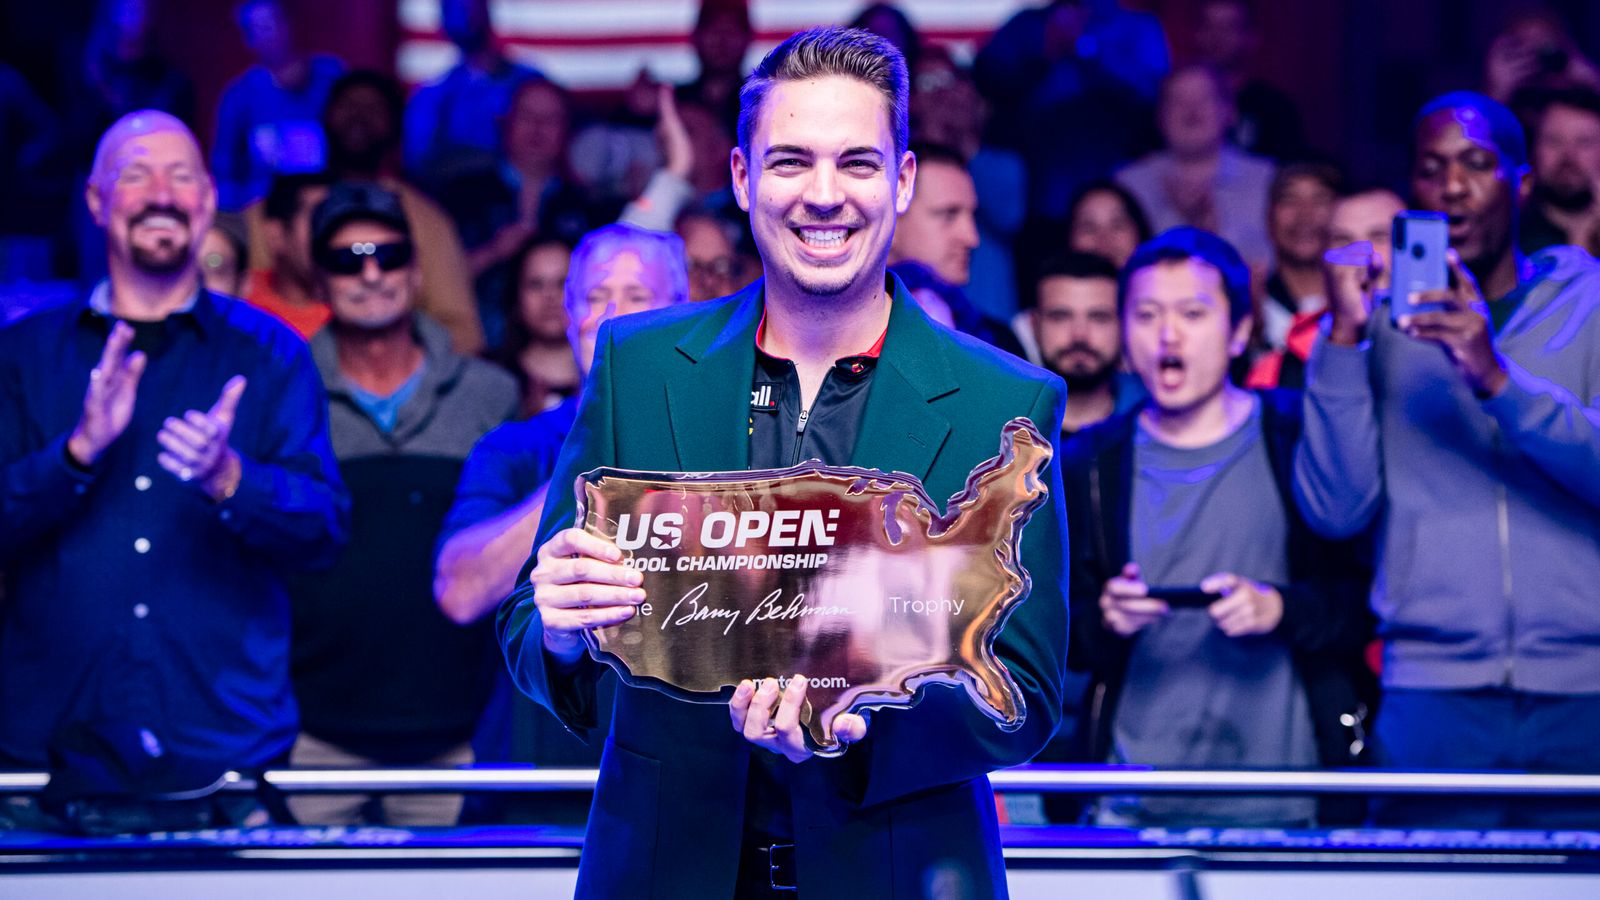 US Open Pool Championship: Francisco Sanchez Ruiz defeats Max Lechner in final to move to world No 1